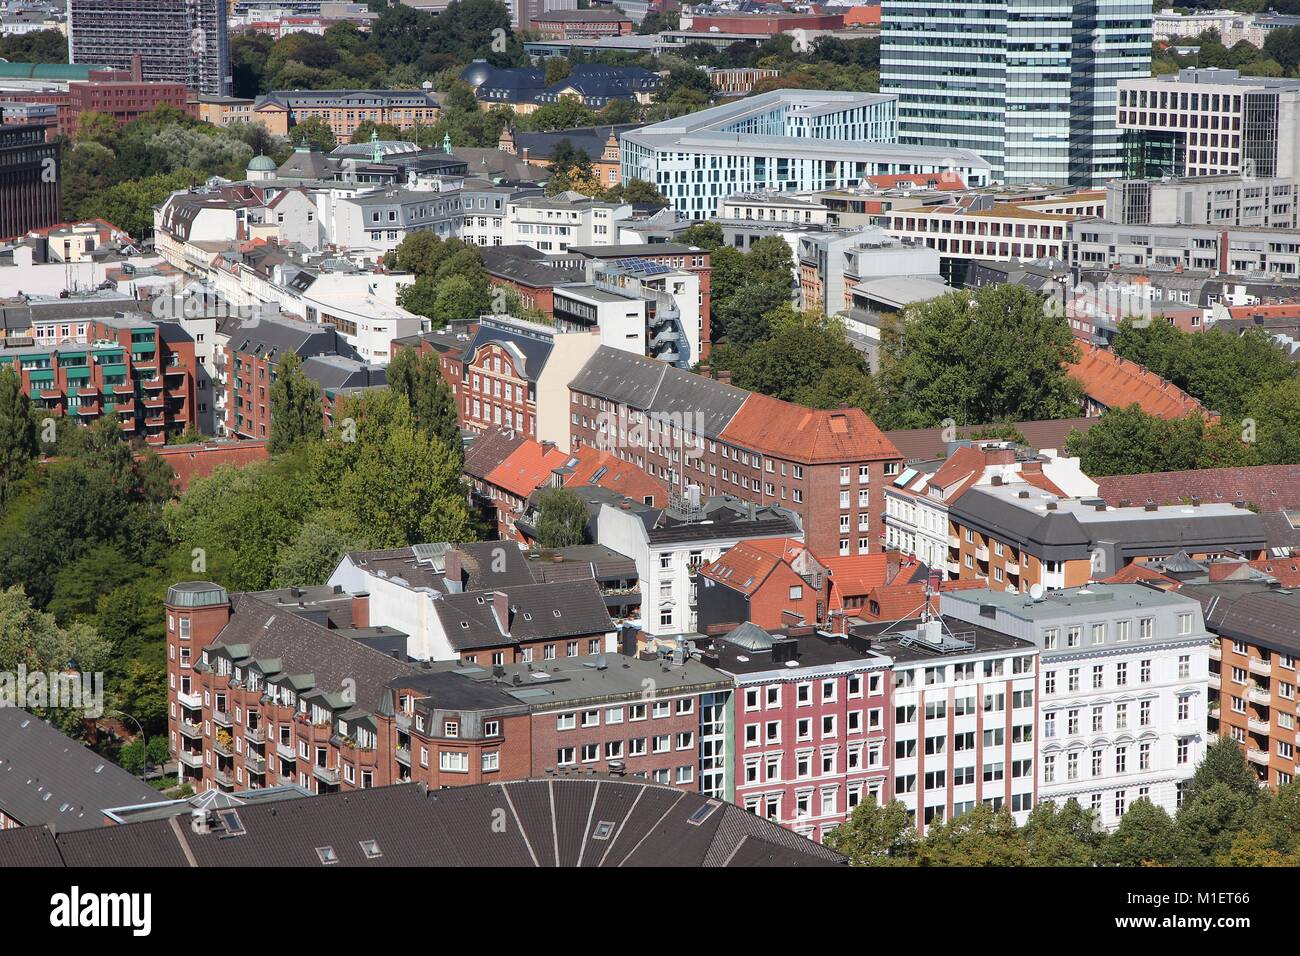 Hamburg, Germany - old town aerial view. German city. Stock Photo